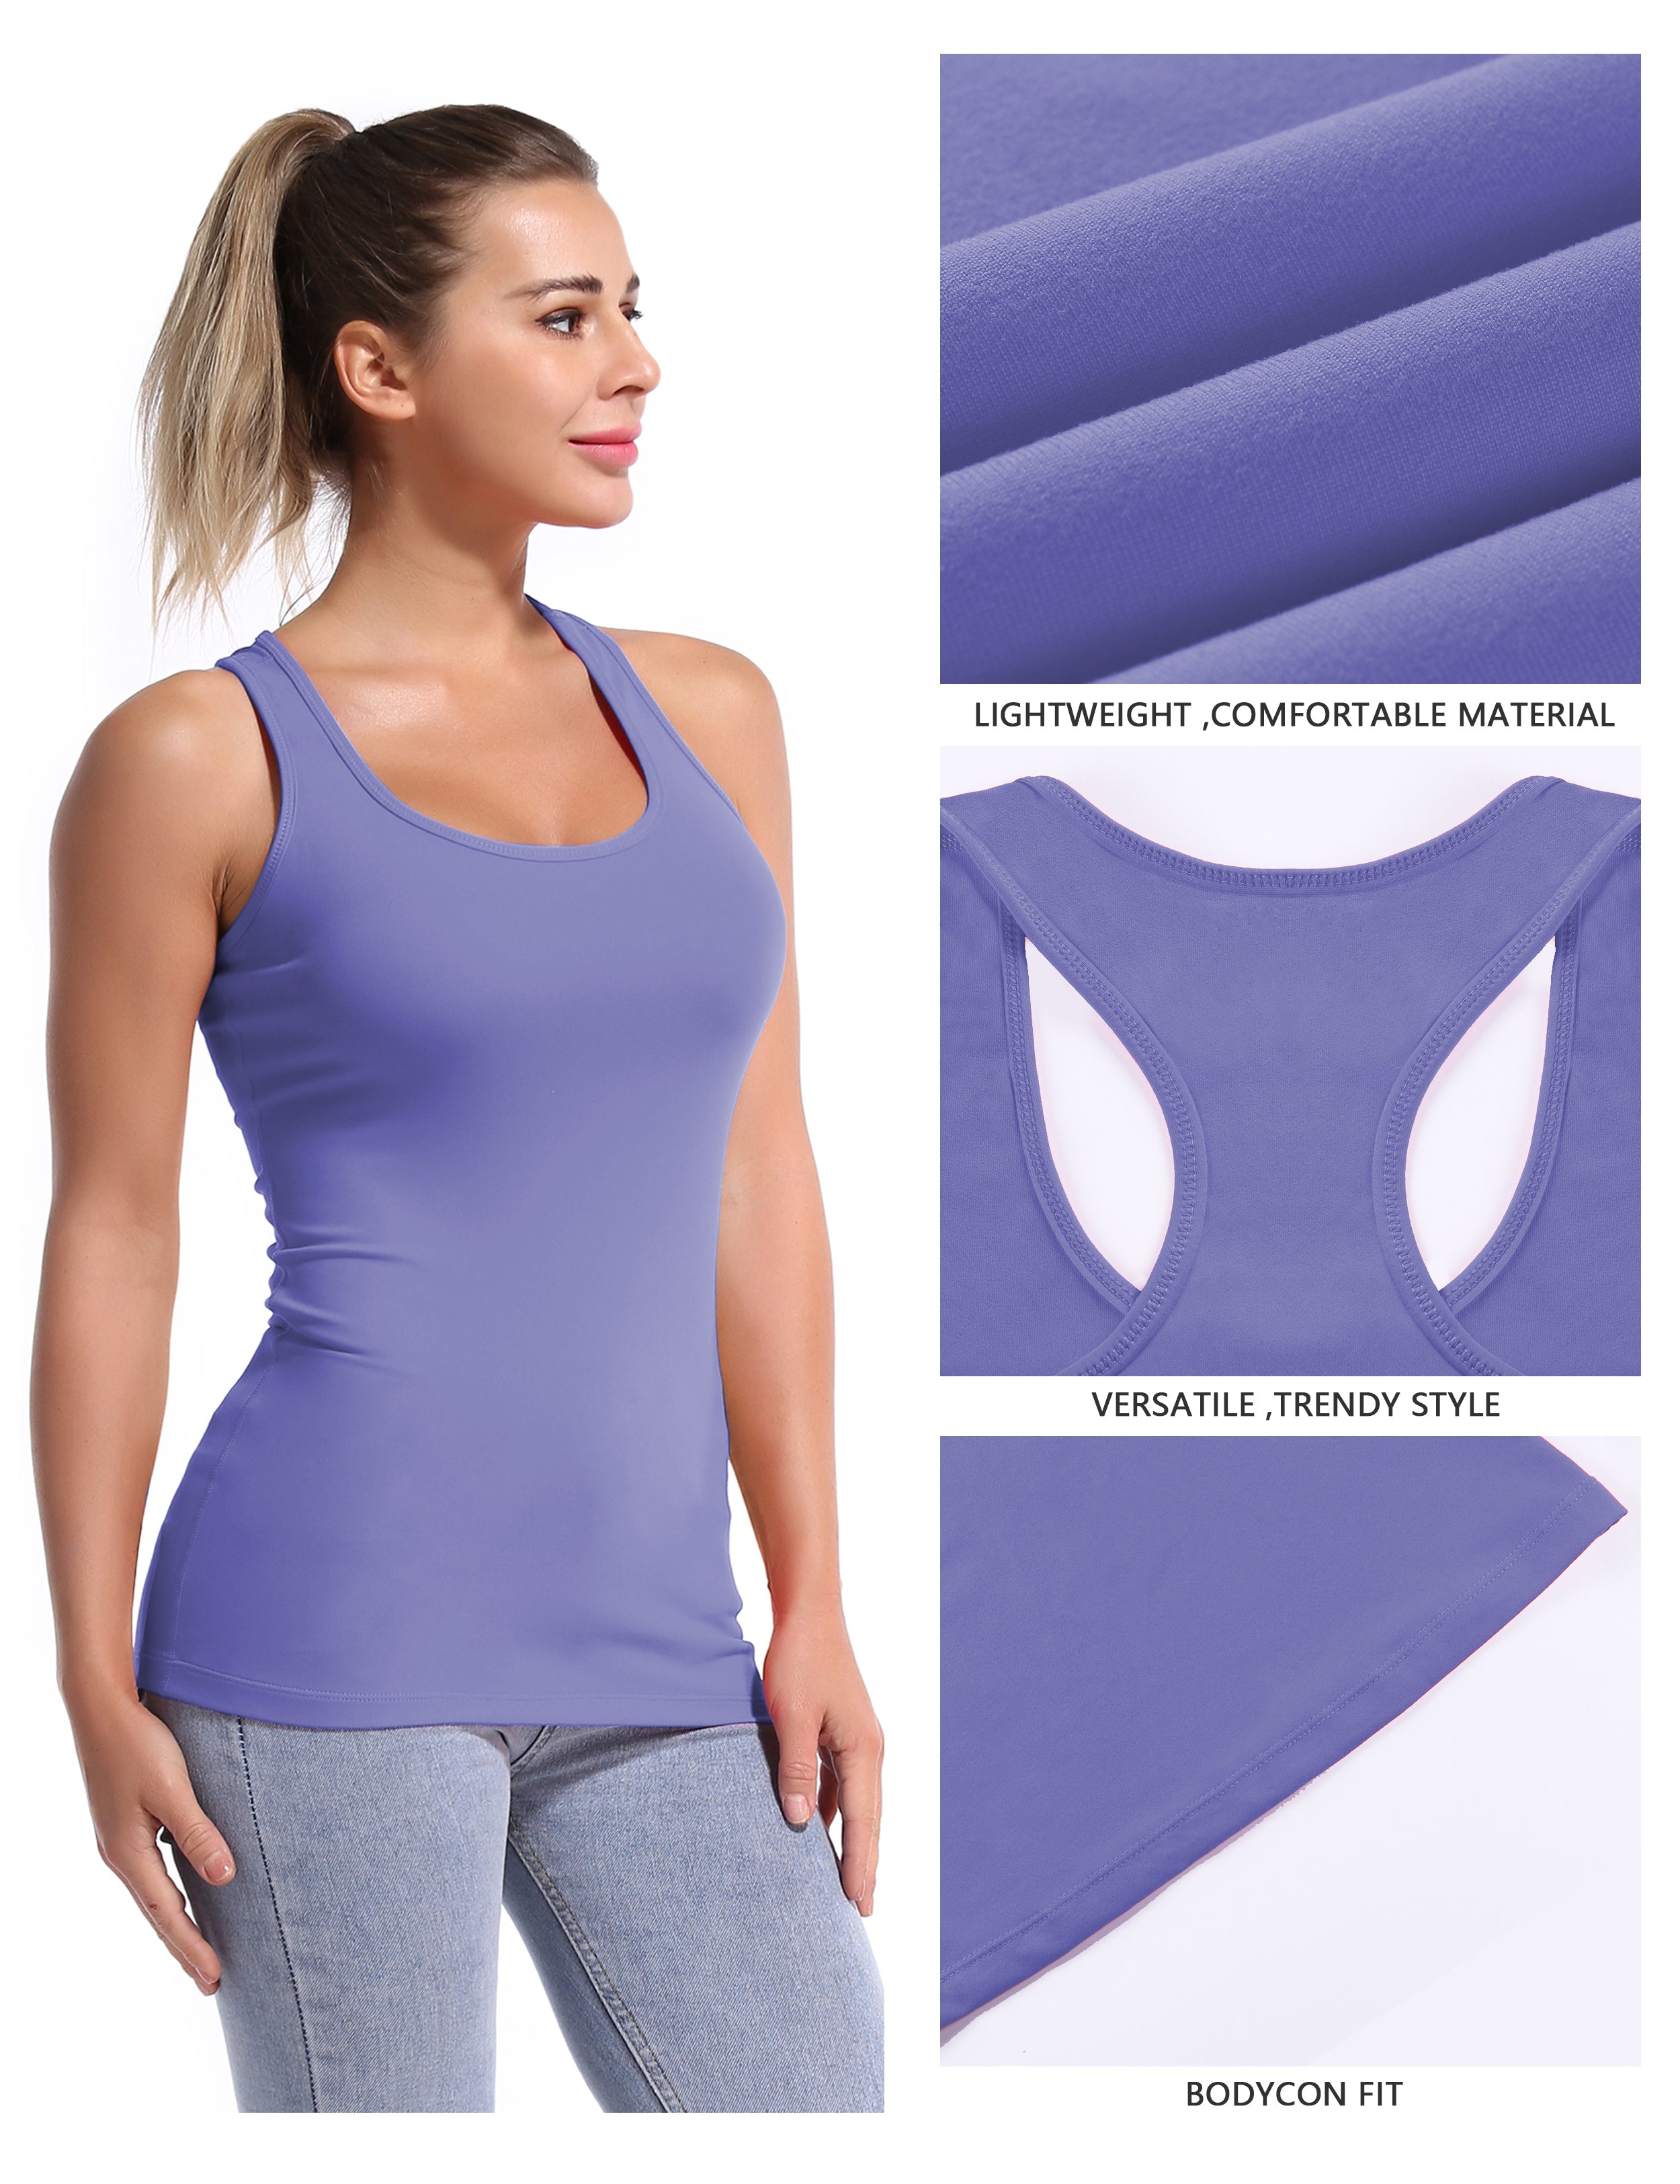 Racerback Athletic Tank Tops lavender 92%Nylon/8%Spandex(Cotton Soft) Designed for Yoga Tight Fit So buttery soft, it feels weightless Sweat-wicking Four-way stretch Breathable Contours your body Sits below the waistband for moderate, everyday coverage